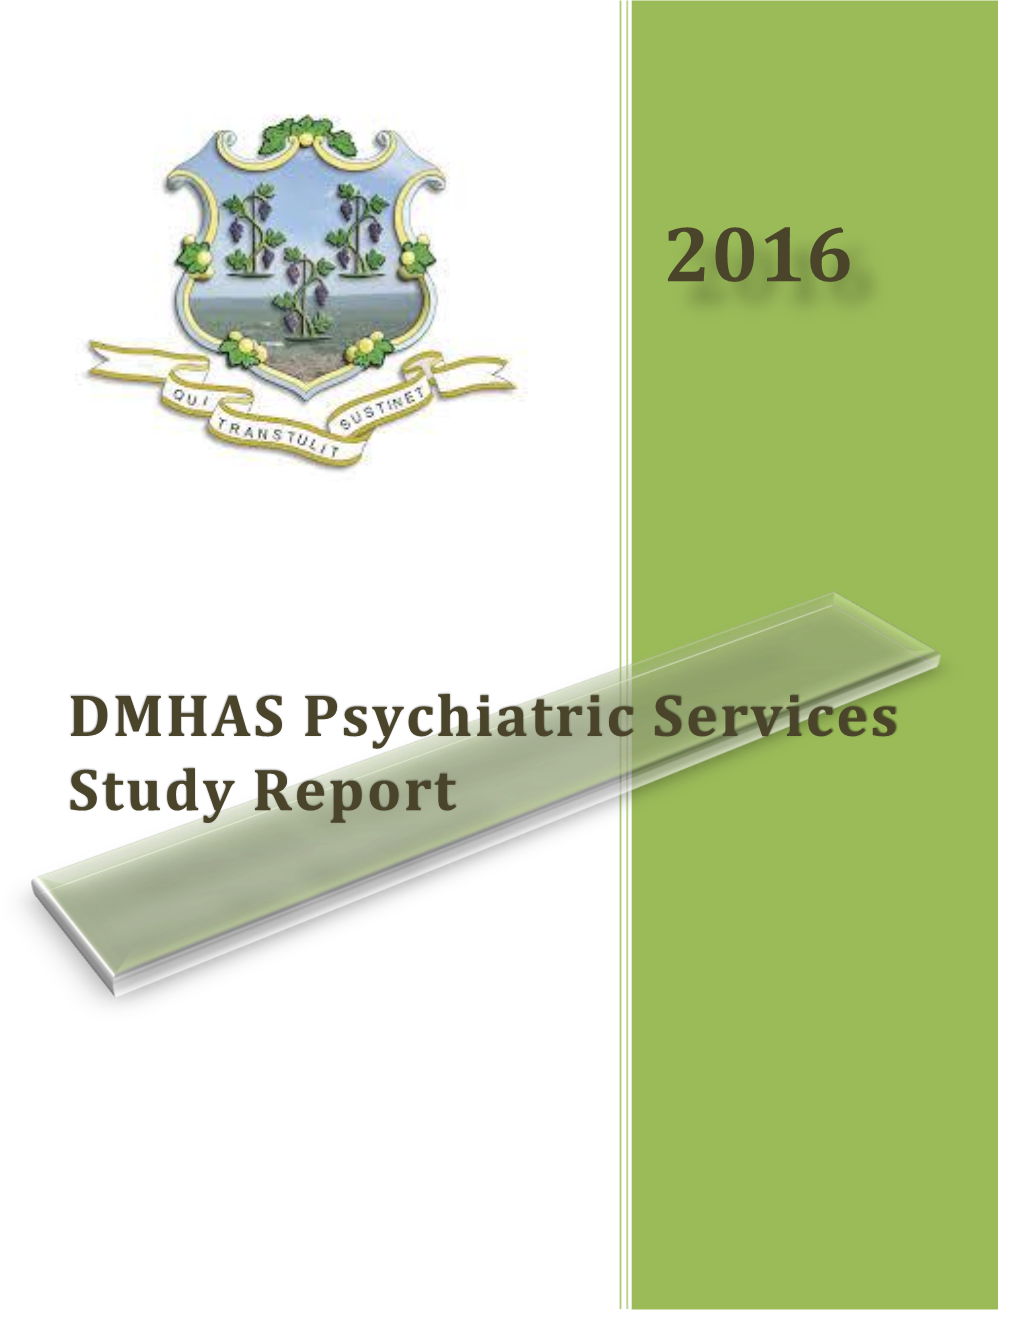 DMHAS and DCF Psychiatric Services Study Report